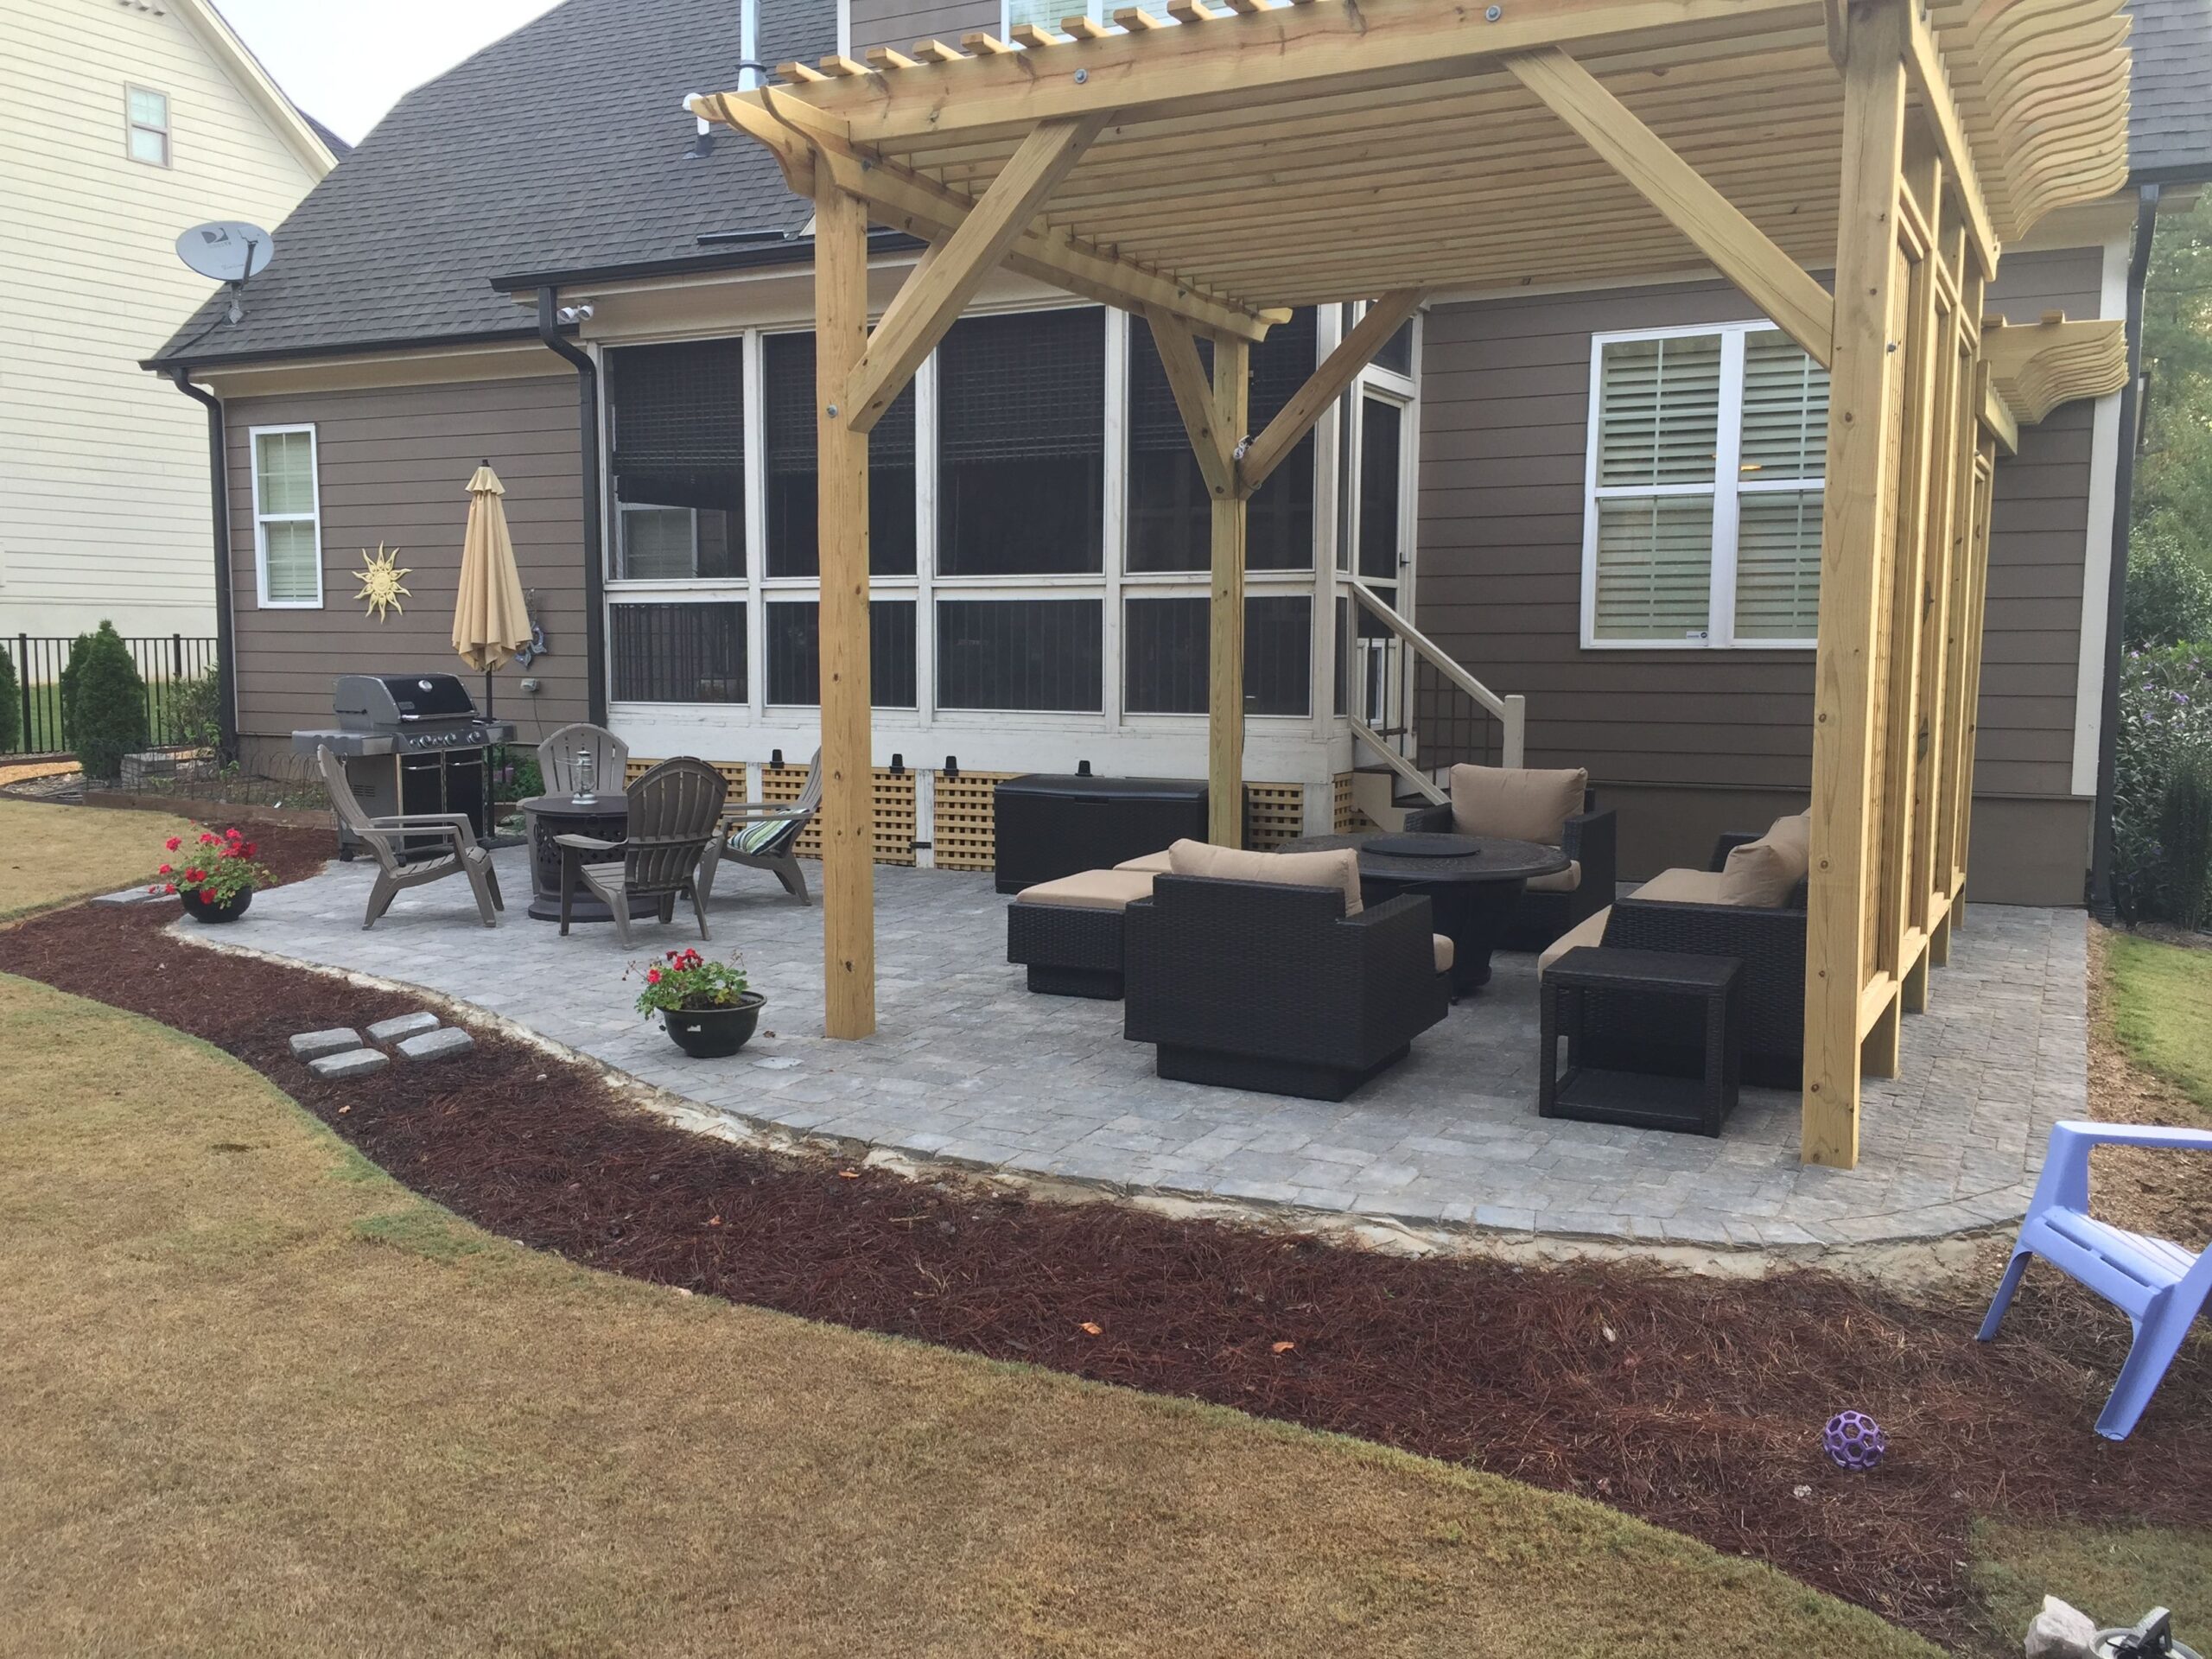 Outdoor living space with custom stone paver patio and gazebo over the patio